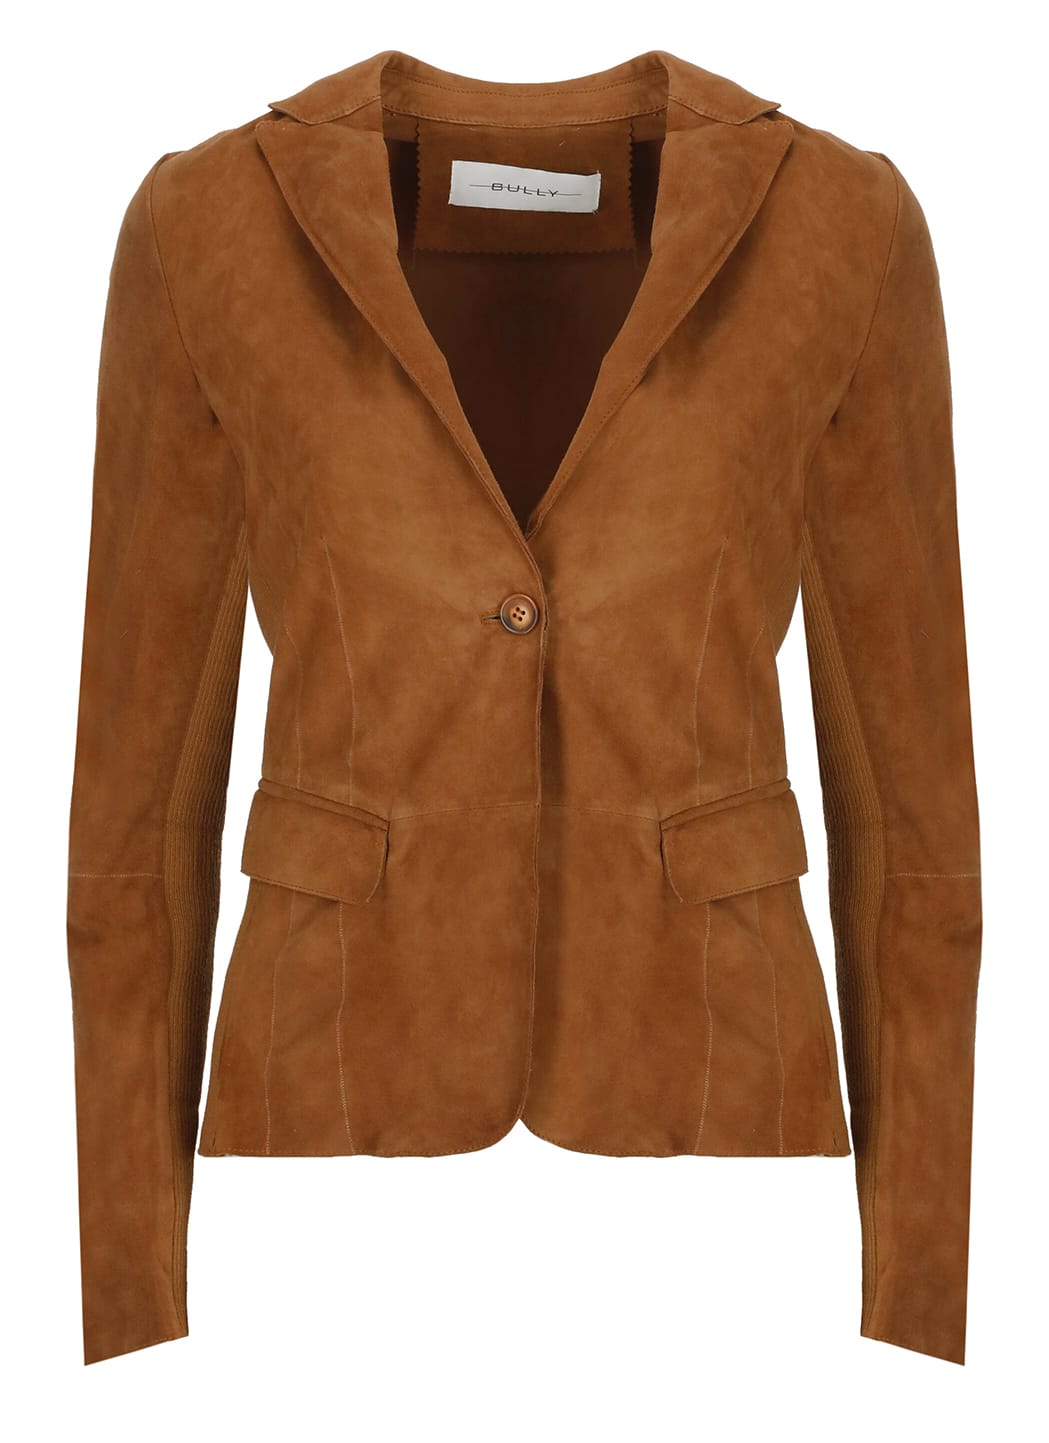 Bully Suede Leather Jacket